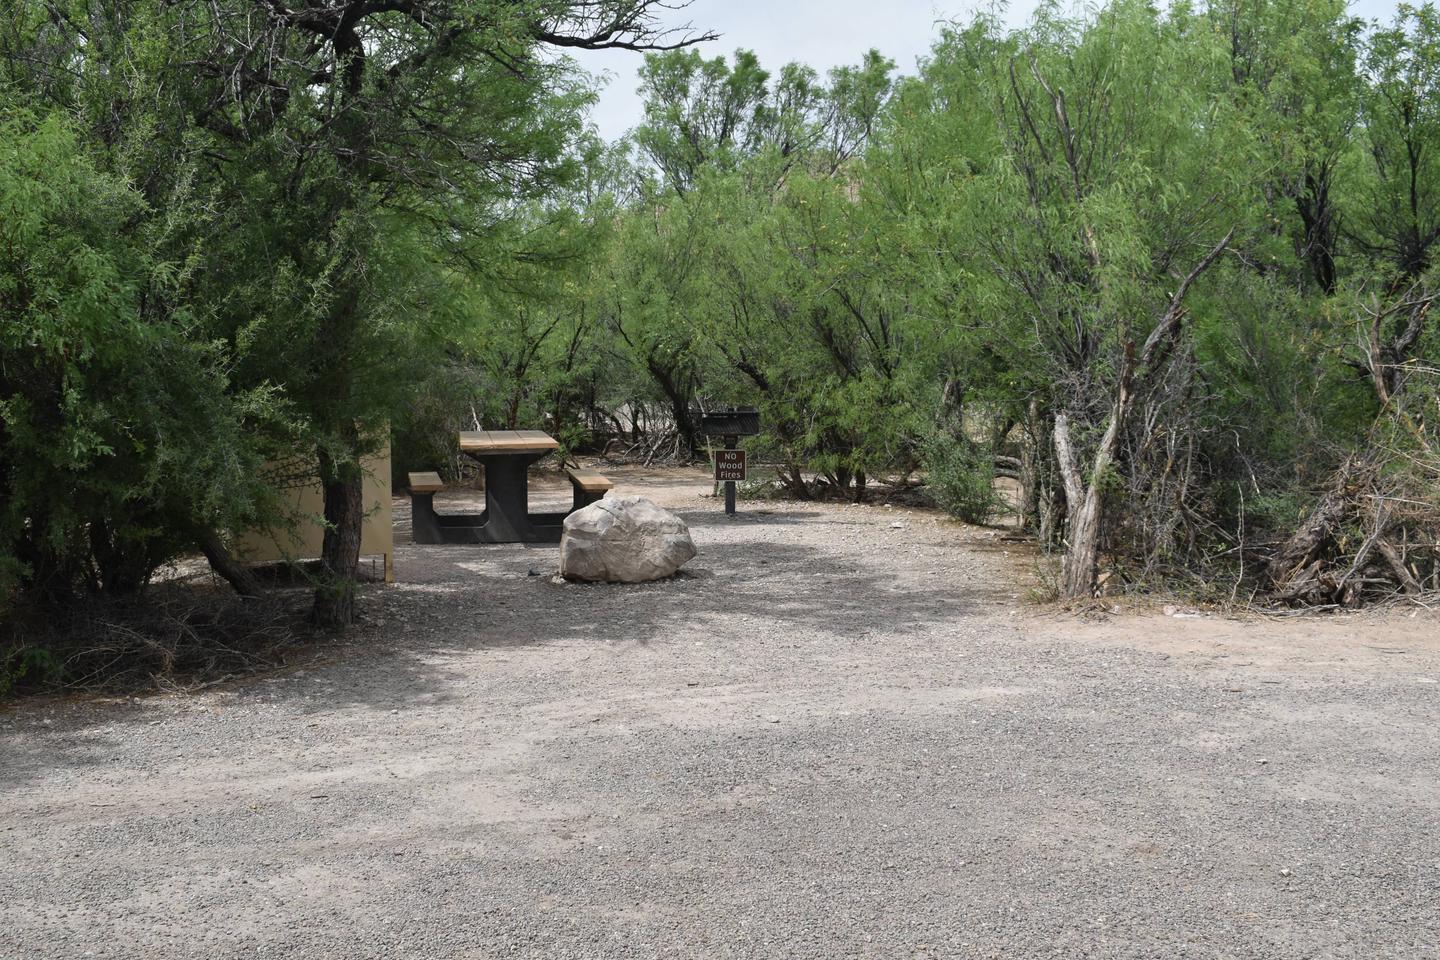 View of the parking area for site 39. The parking space is small and not recommended for larger vehicles. Parking area for Site 39